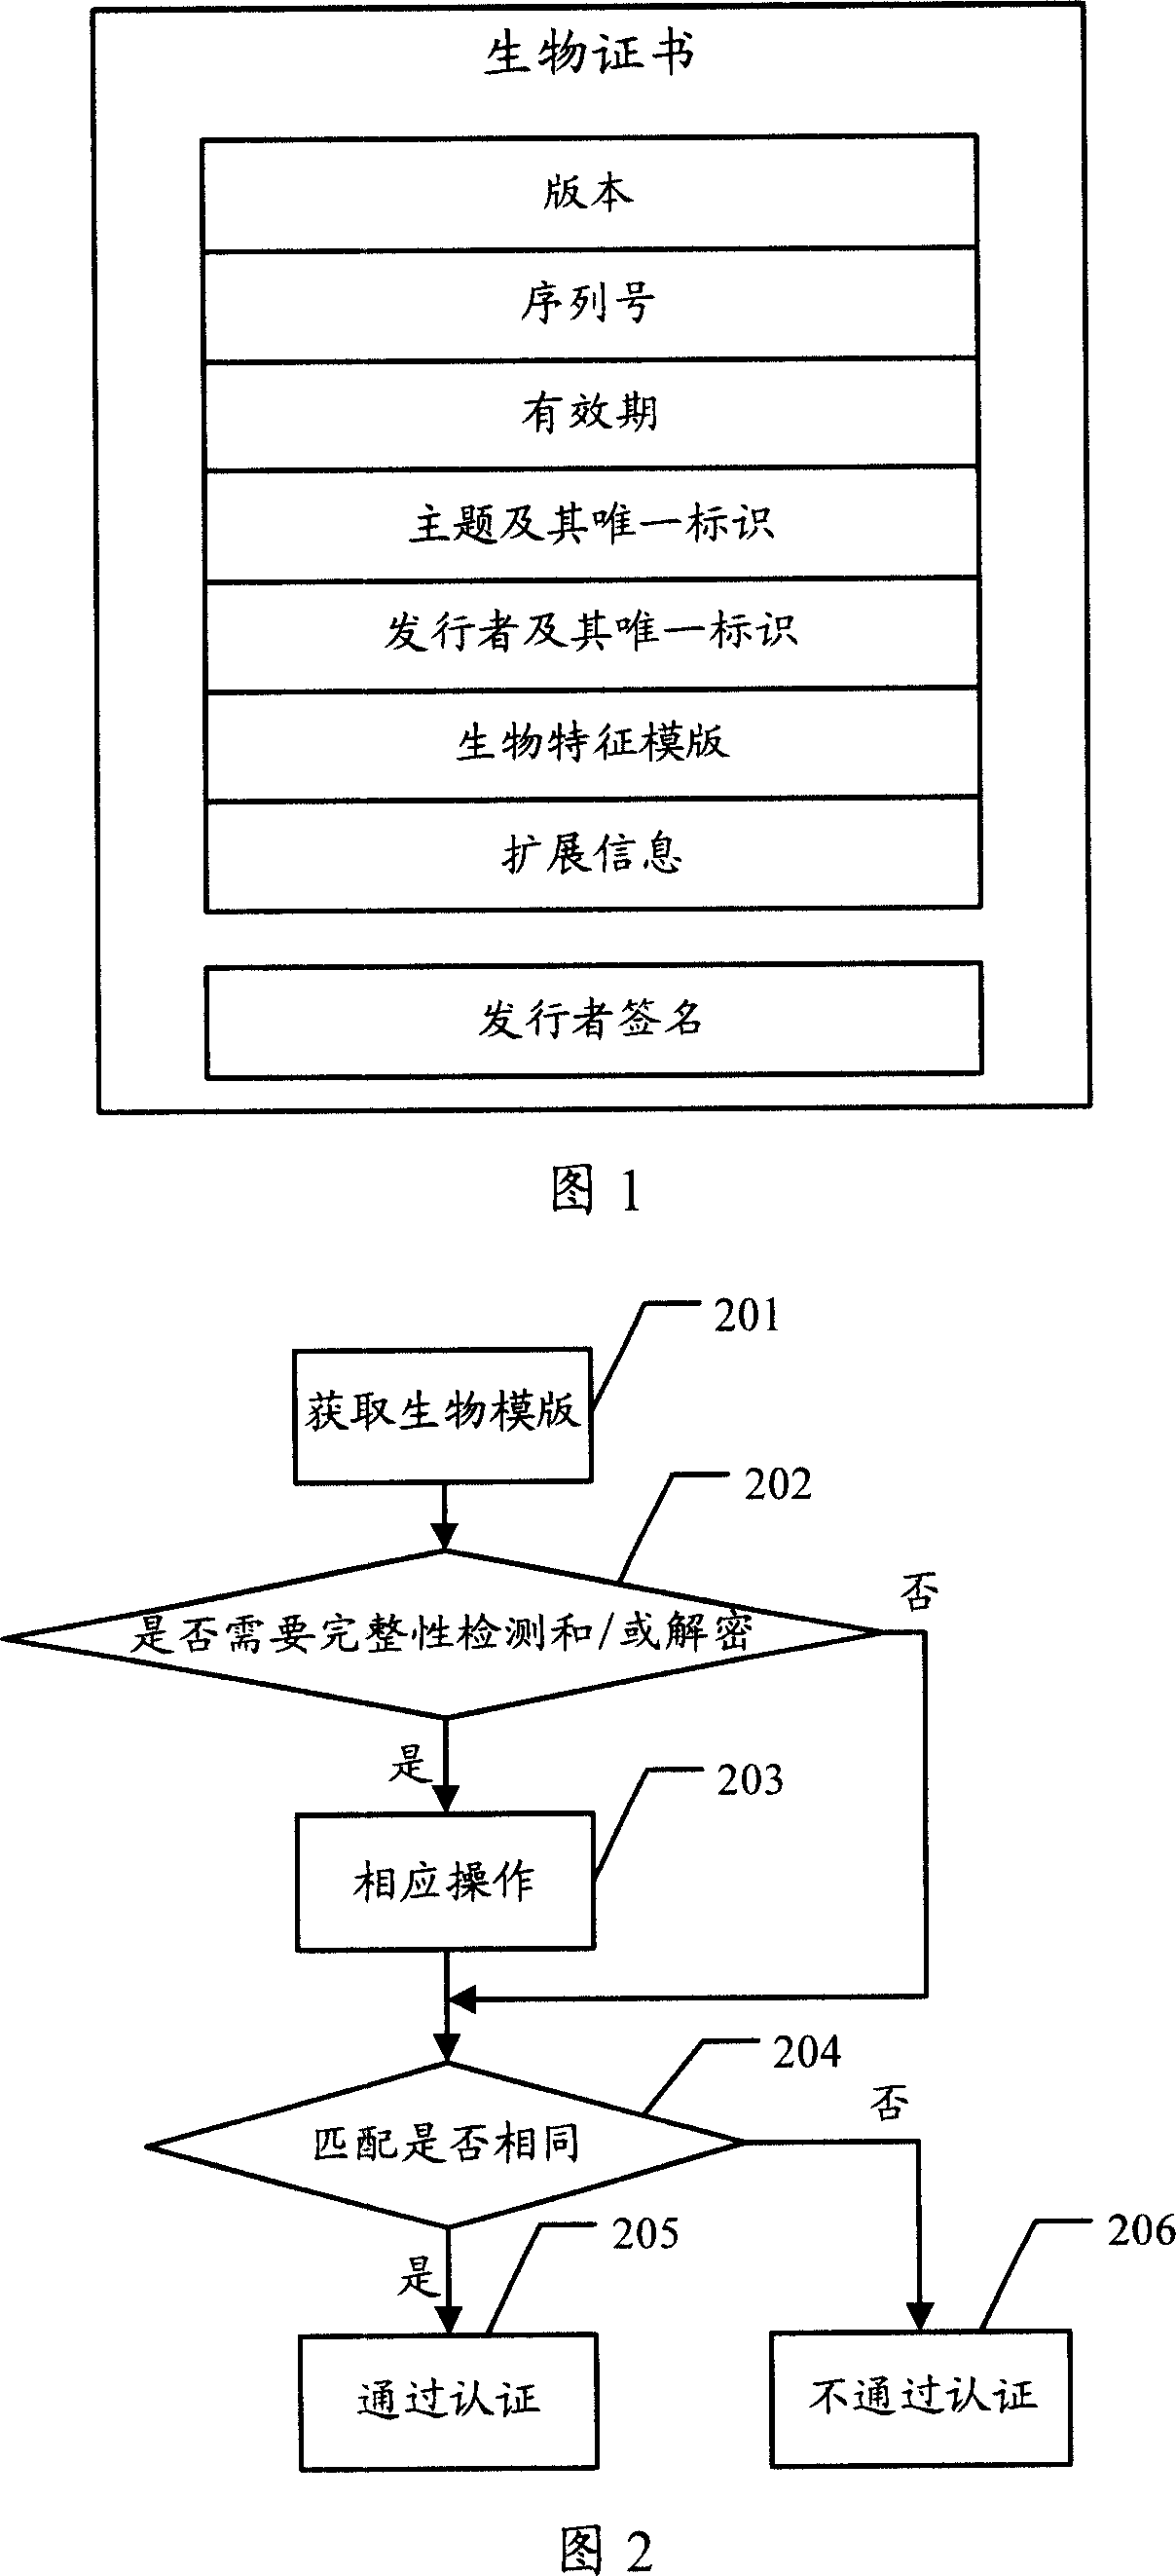 Biological stencil and method to produce biological stencil and identification identifying method